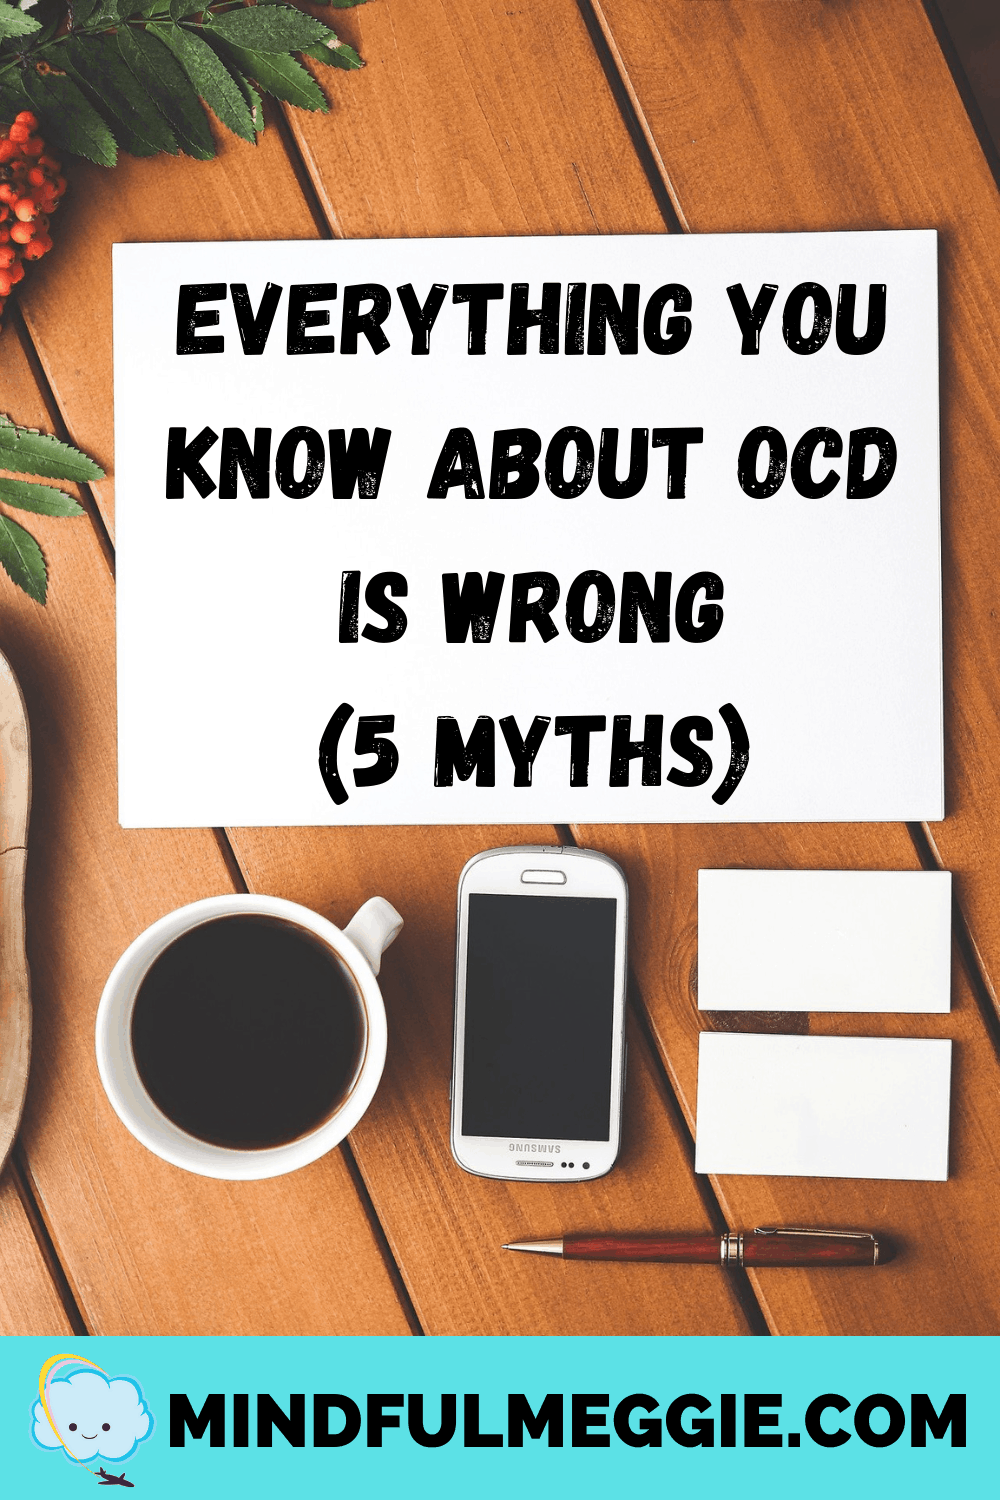 OCD is one of the most misunderstood mental illnesses. I dispel the myths and tell you the truth. #ocd #ocdmyth #ocdmyths #lifewithocd #obsessivecompulsivedisorder